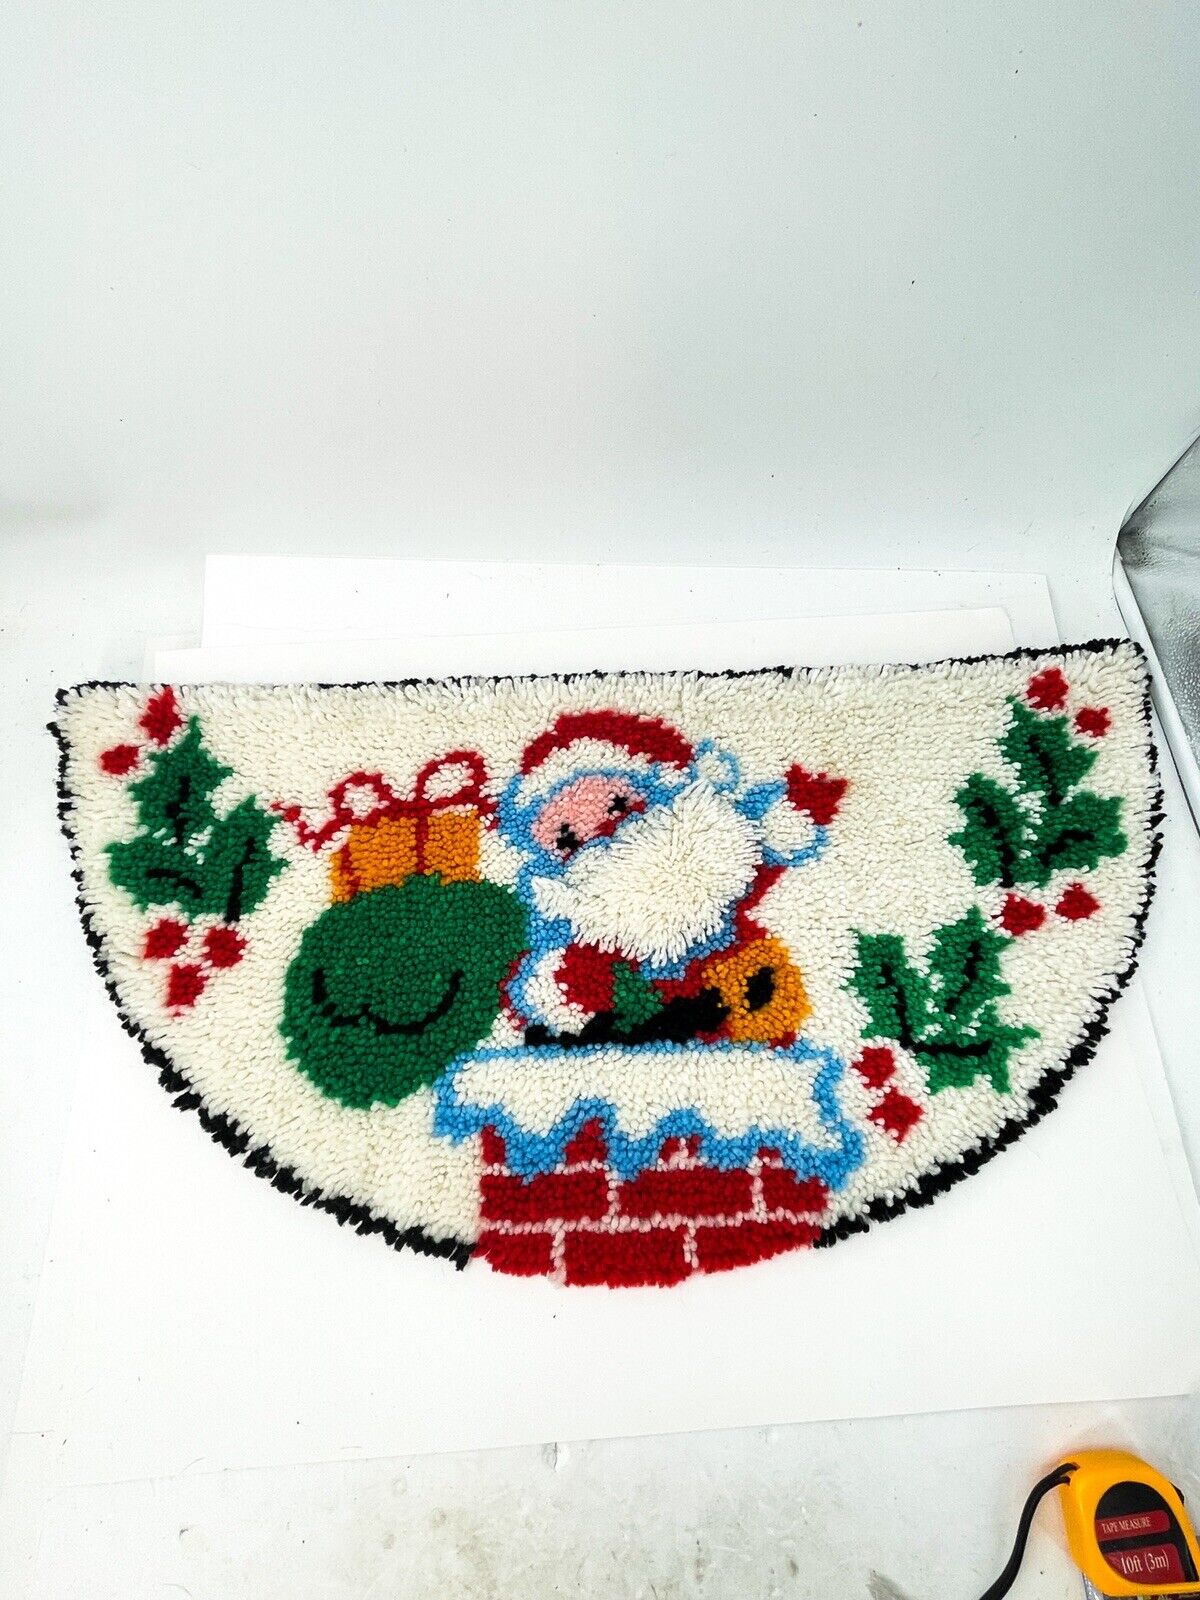 Vtg 1970's Santa Claus Latch Hook Finished Wall hanging or rug, no damage. 33x16